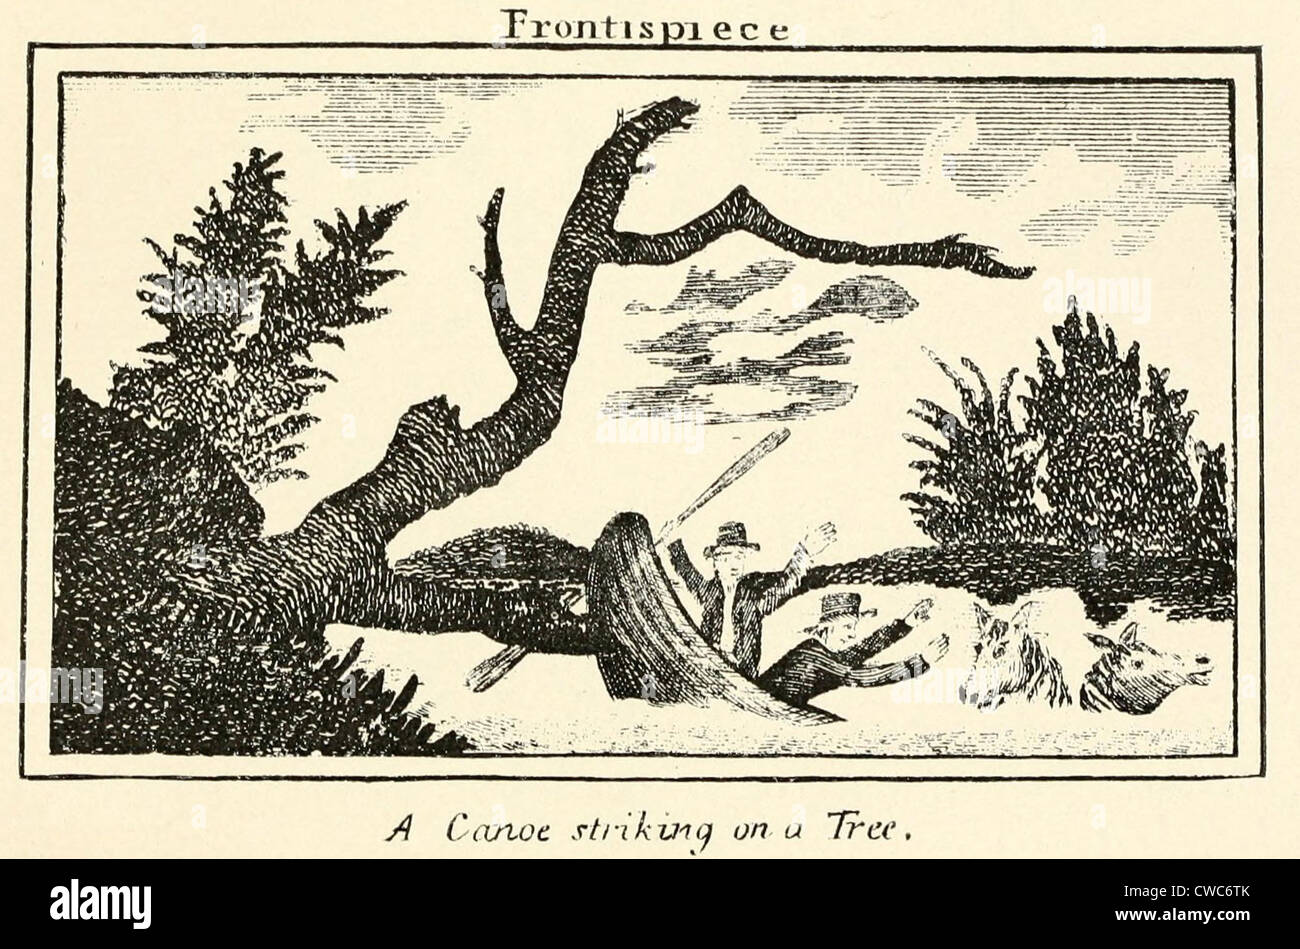 Illustration from Lewis and Clark's journal of the Corps of Discovery from 1803-6. 'A Canoe striking on a tree.' Stock Photo